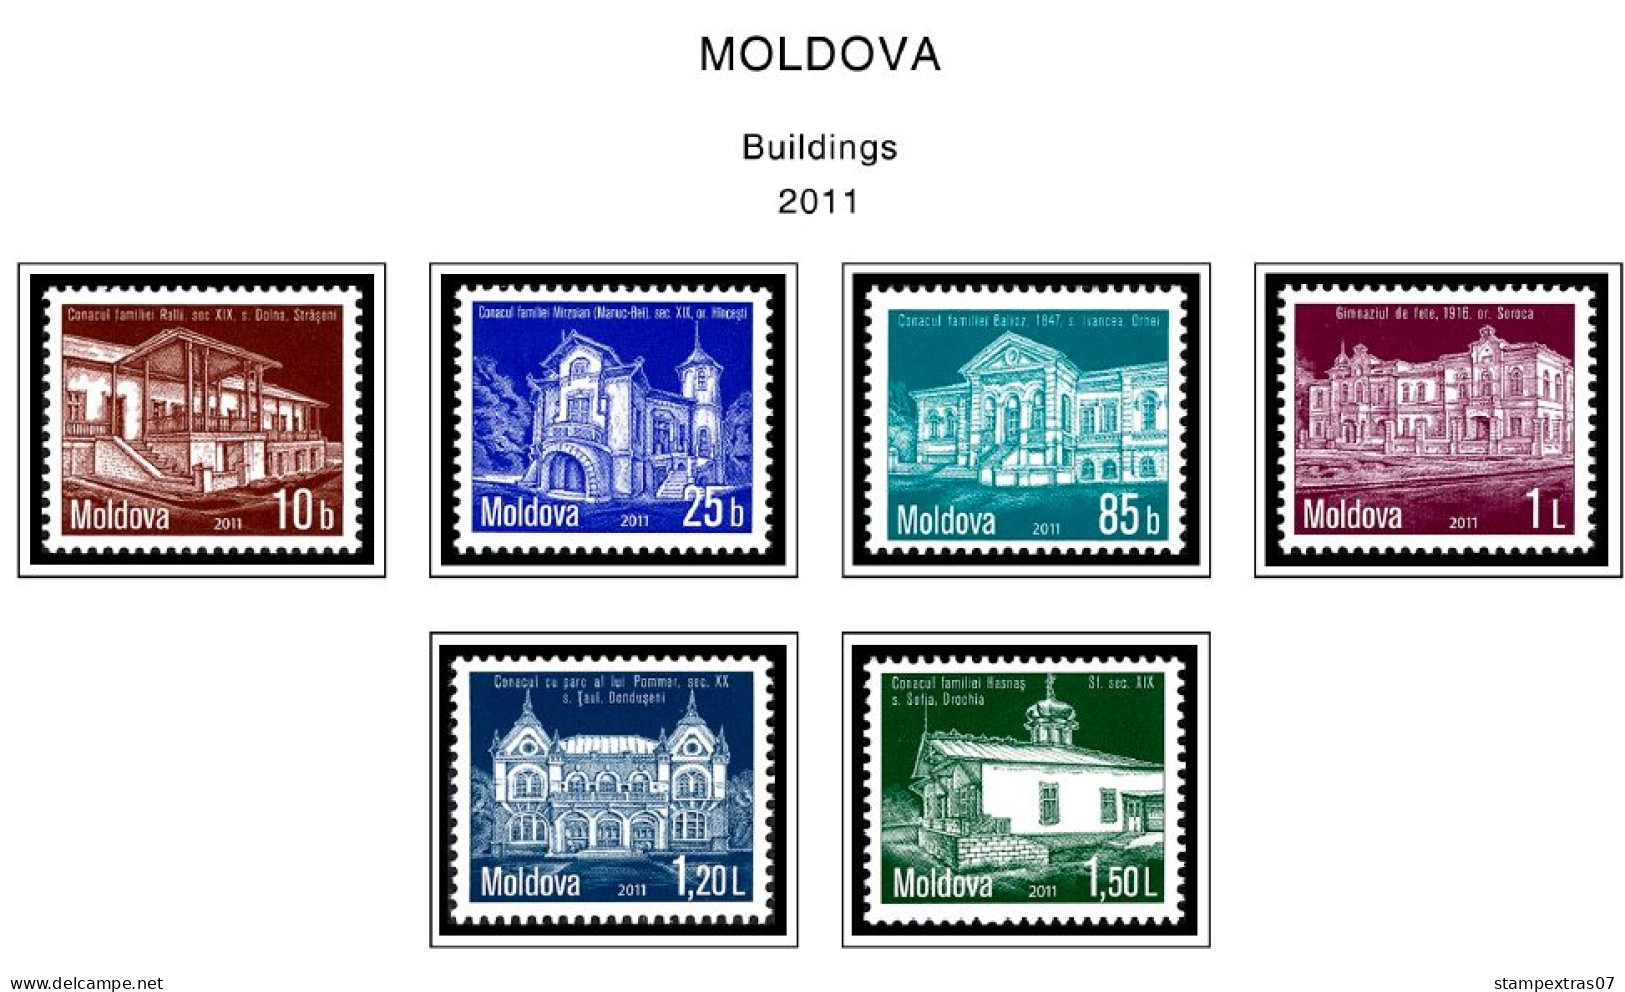 COLOR PRINTED MOLDOVA 2011-2020 STAMP ALBUM PAGES (52 Illustrated Pages) >> FEUILLES ALBUM - Afgedrukte Pagina's